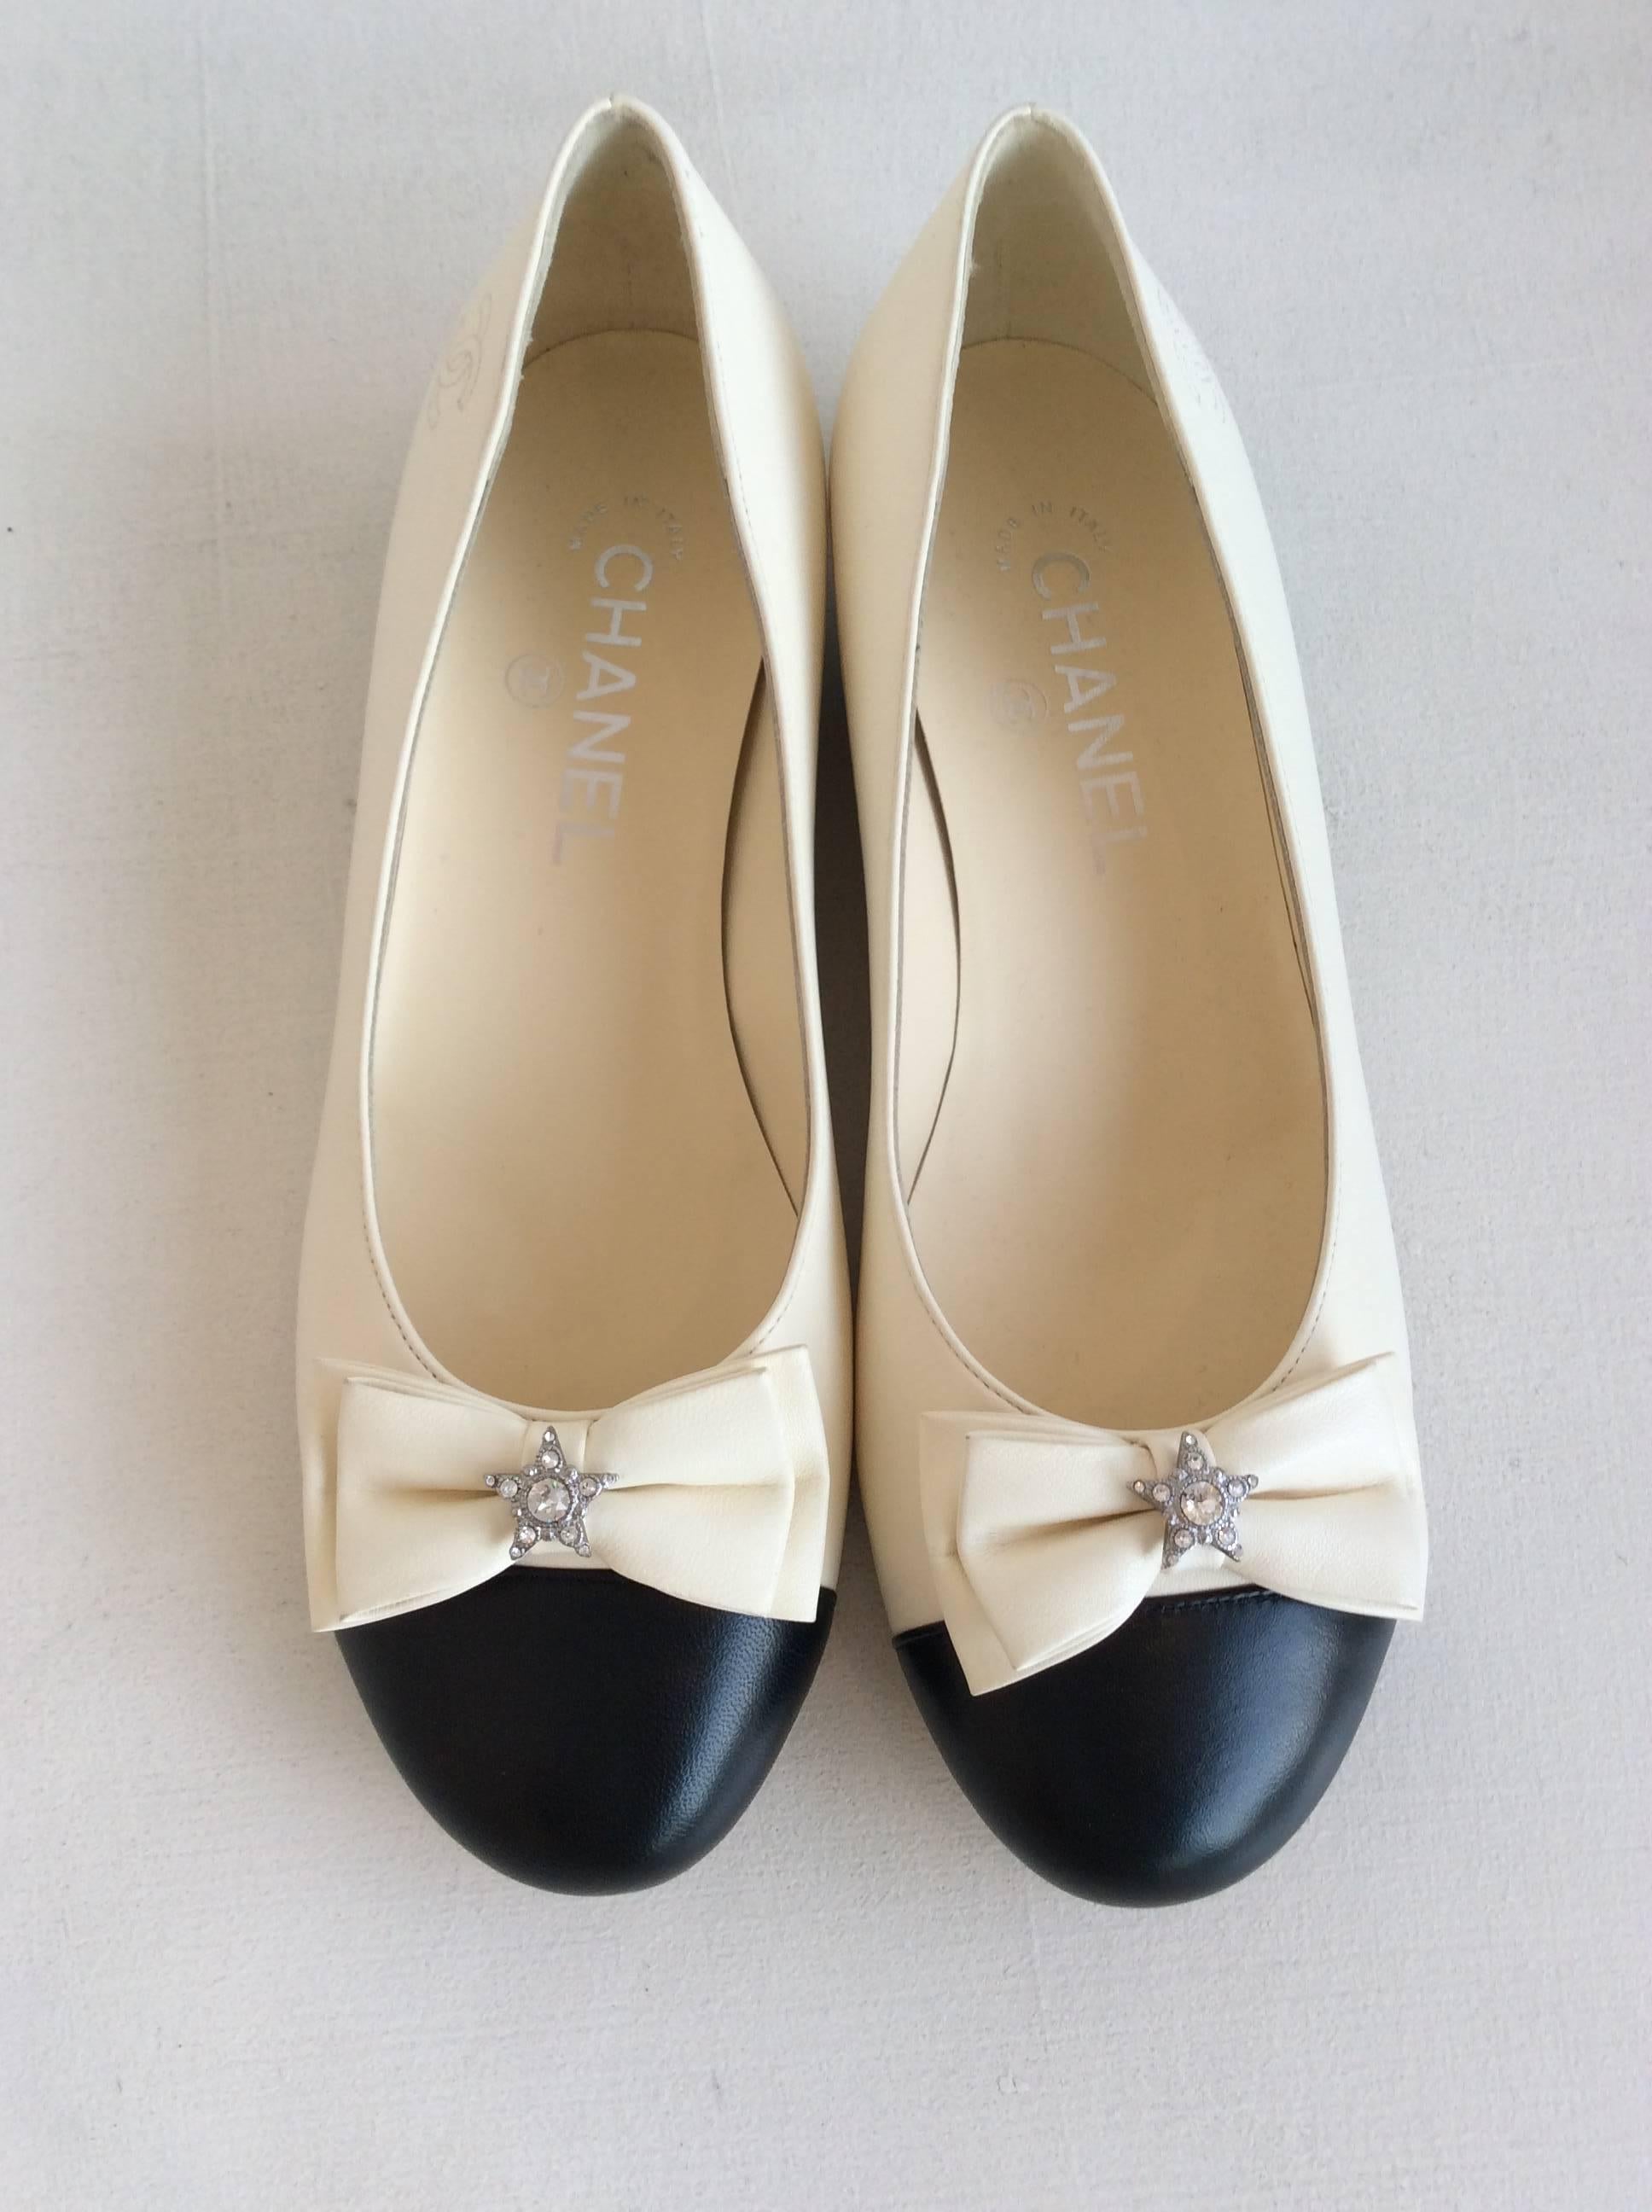 Chanel white leather ballerina flats with black toe. The front is embellished with a white leather bow that has a small clear rhinestone star in the middle.